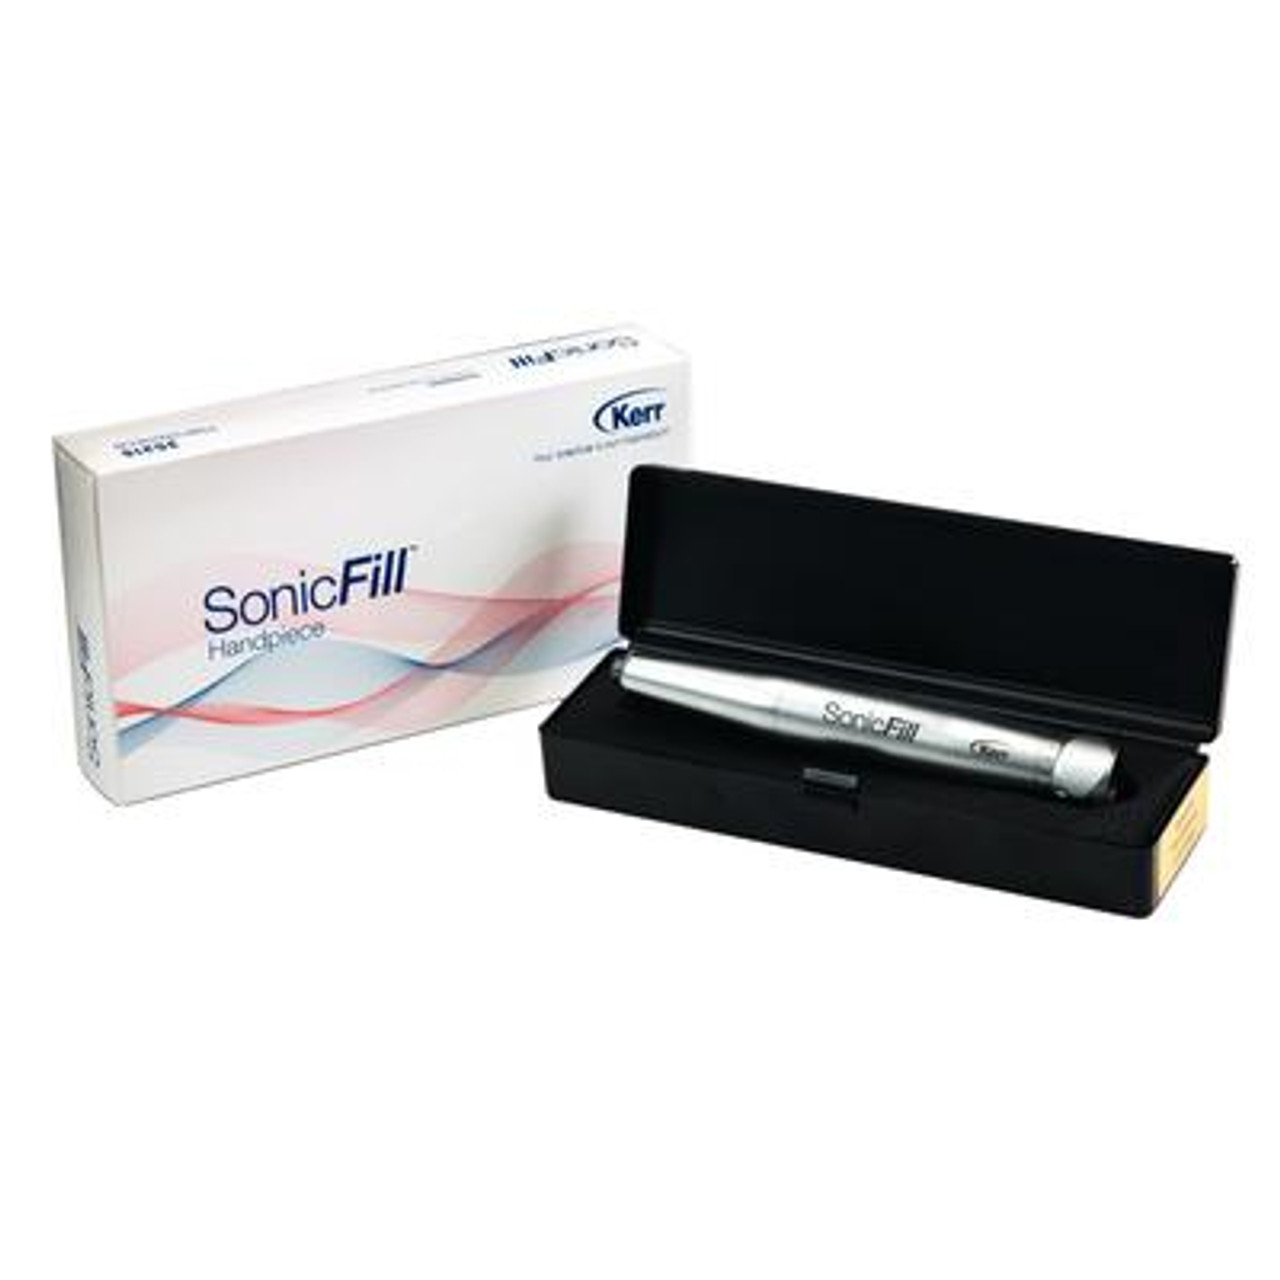 Kerr SonicFill 3 Handpiece Only